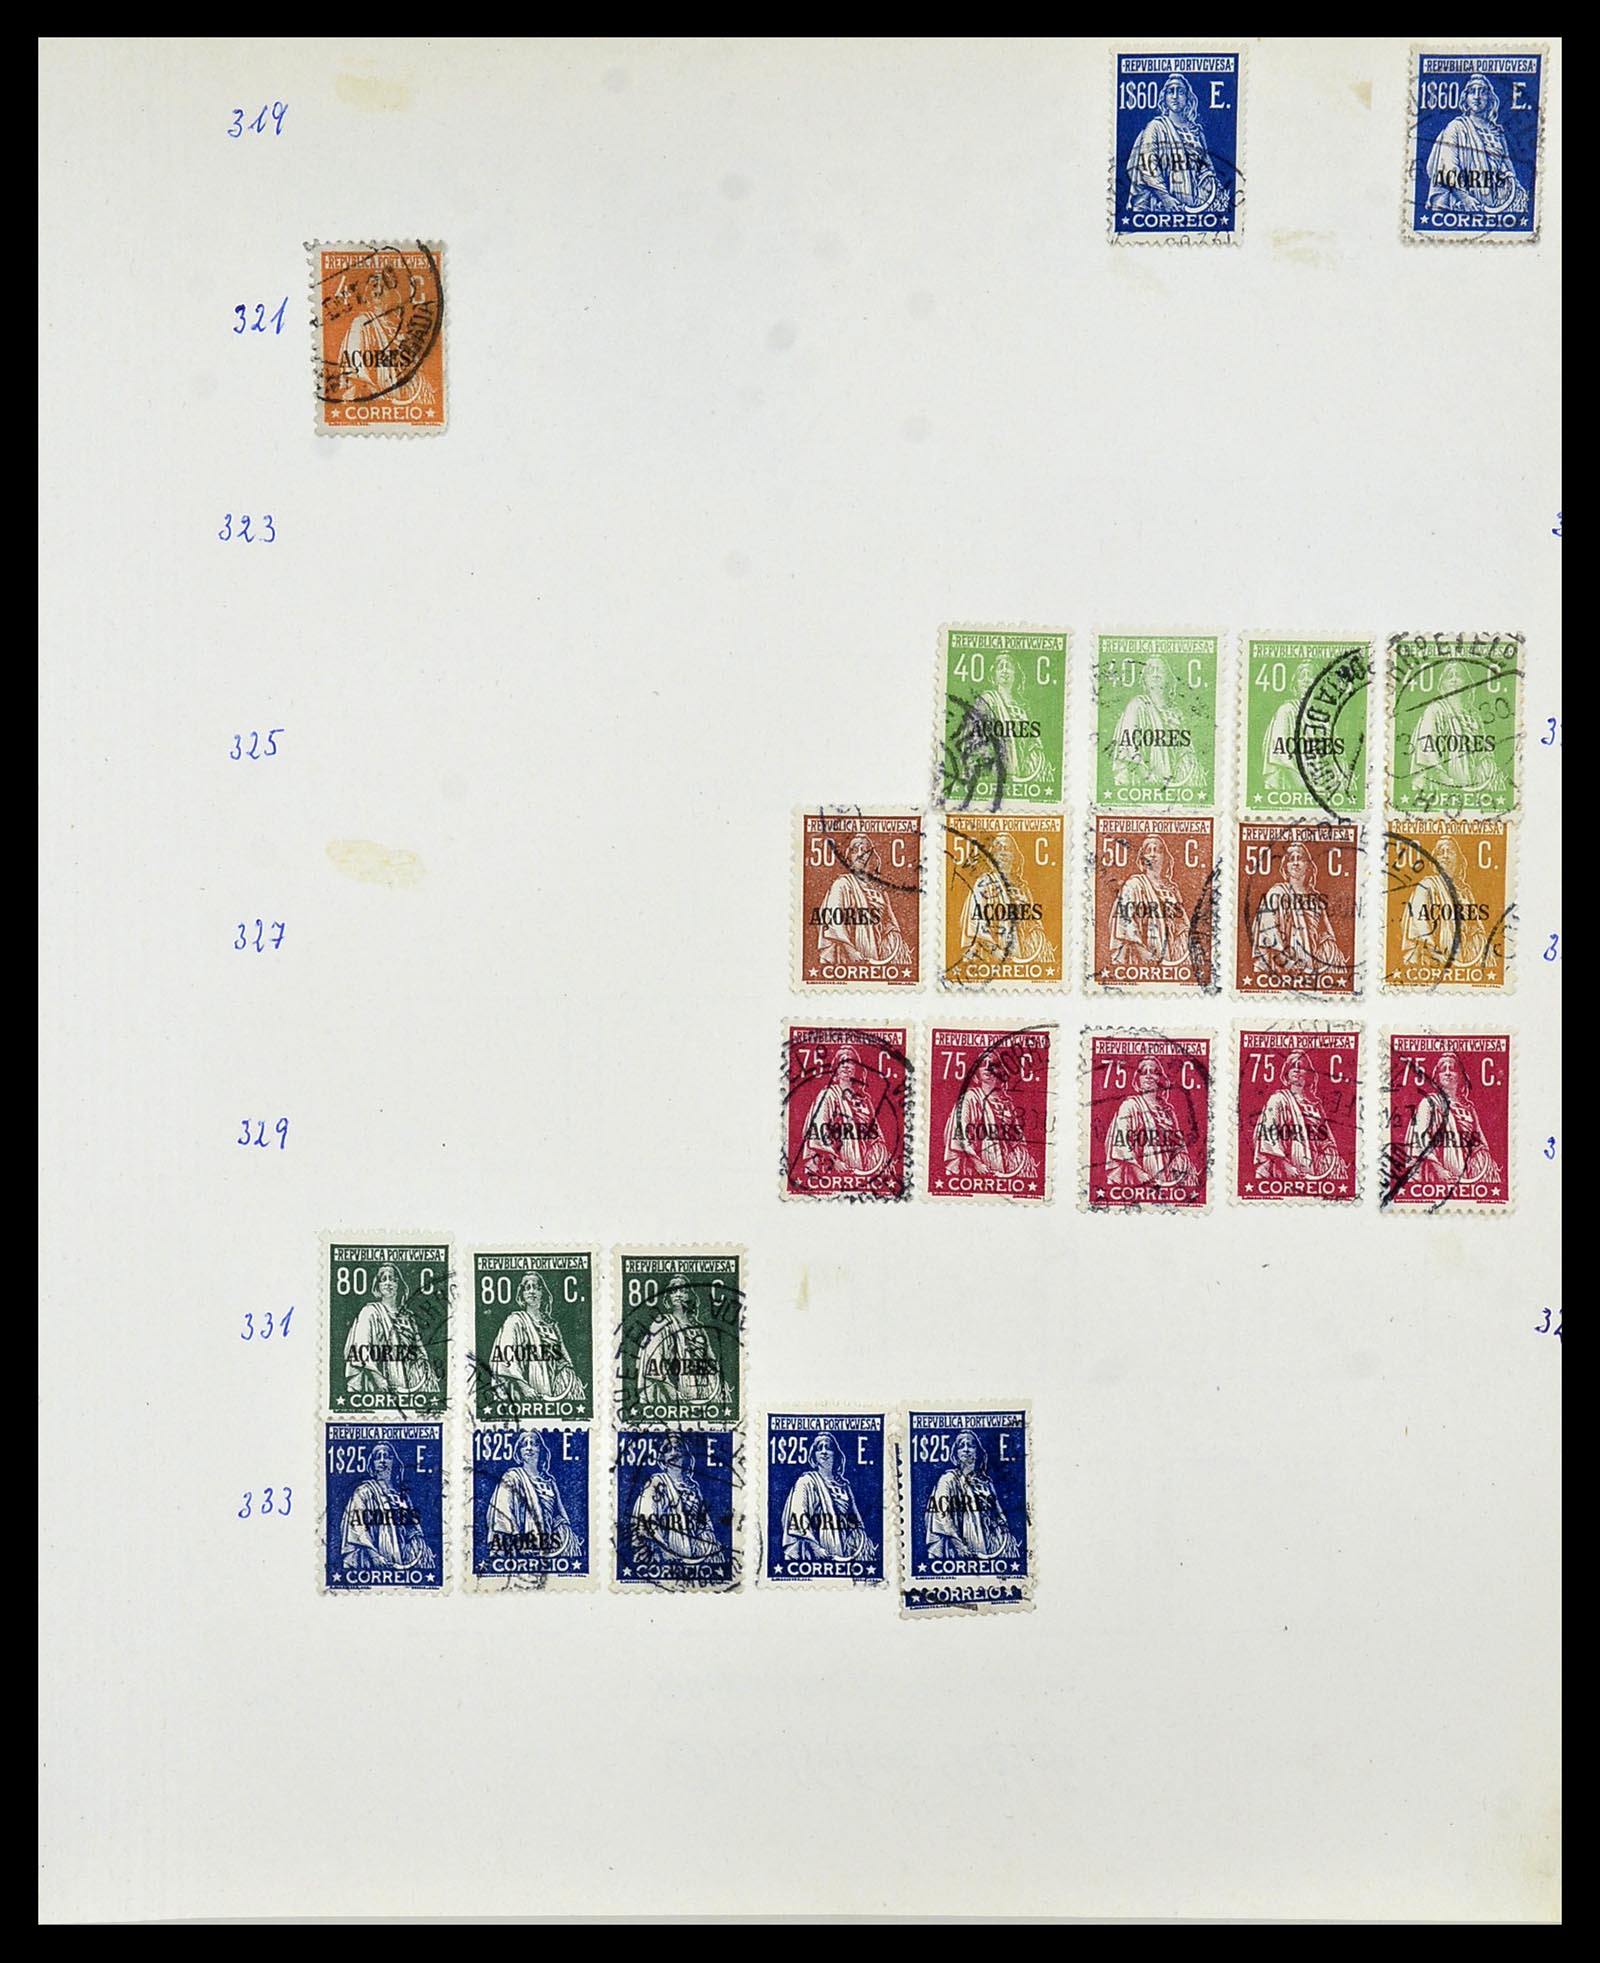 34305 084 - Stamp collection 34305 Portugese colonies 1870-1970.